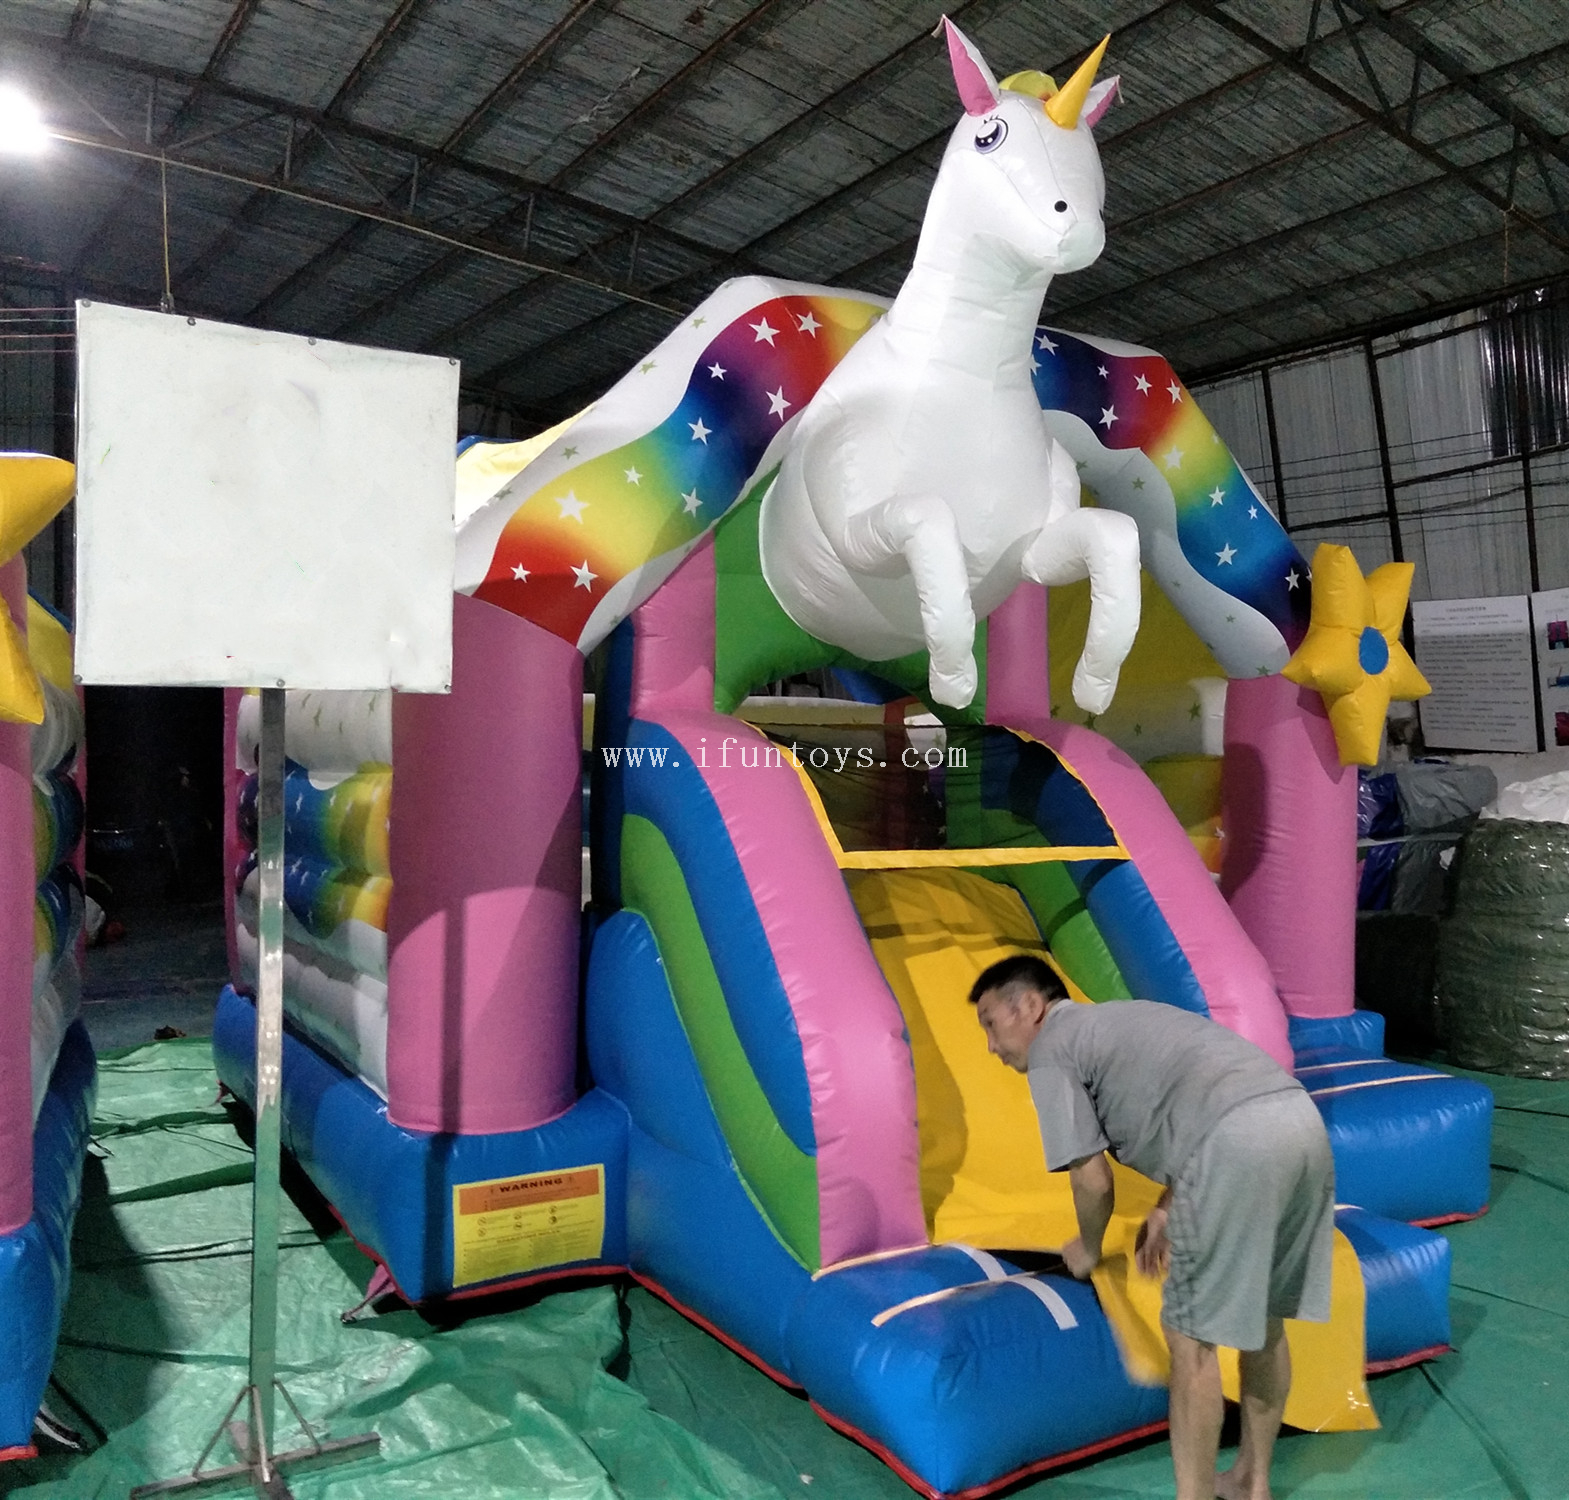 Outdoor inflatable Rainbow Unicorn Bounce House with slide/Unicorn bouncy castle/ Inflatable Unicorn combo for party rentals